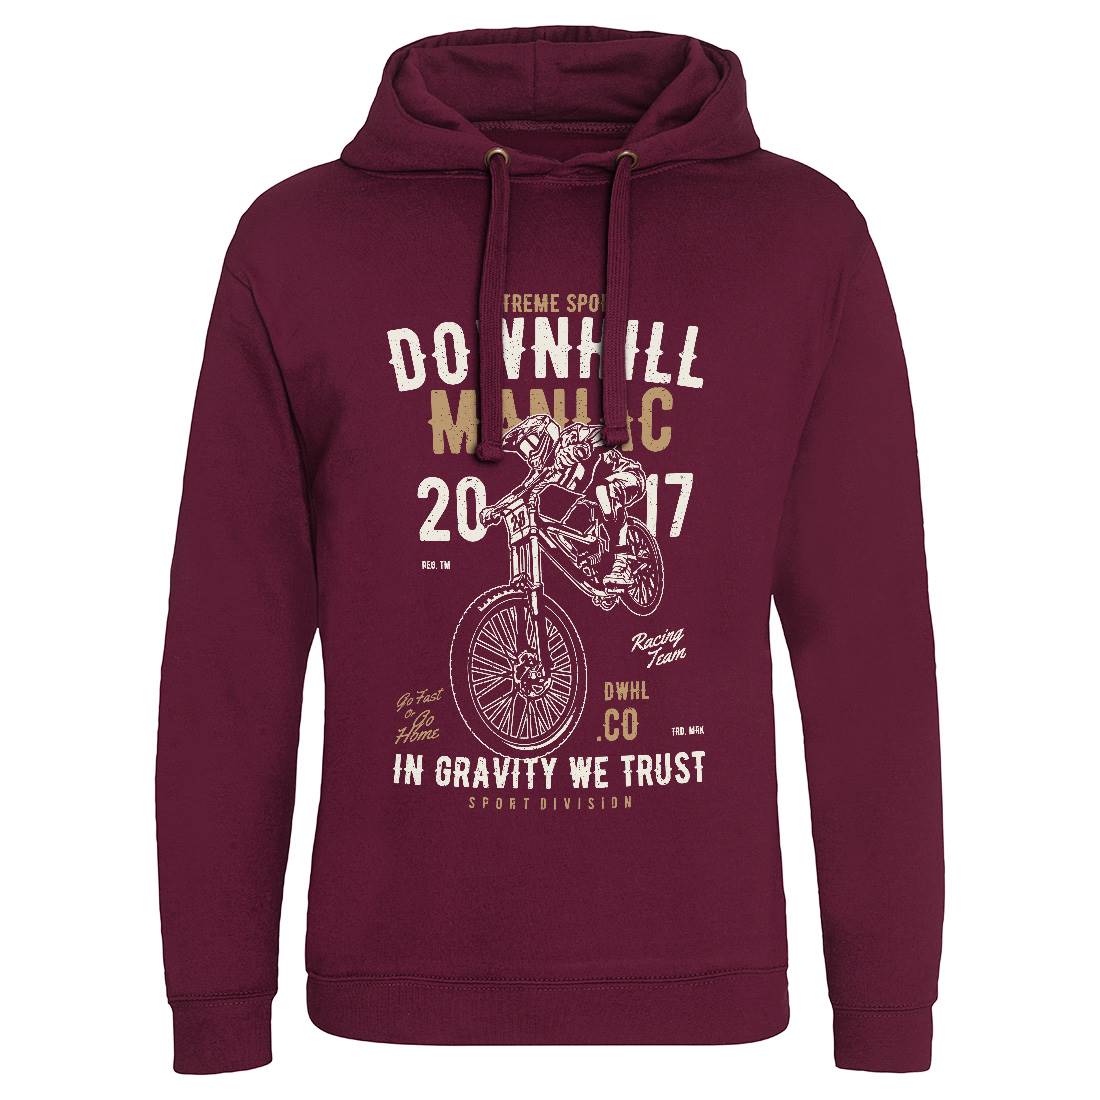 Downhill Maniac Mens Hoodie Without Pocket Bikes A644